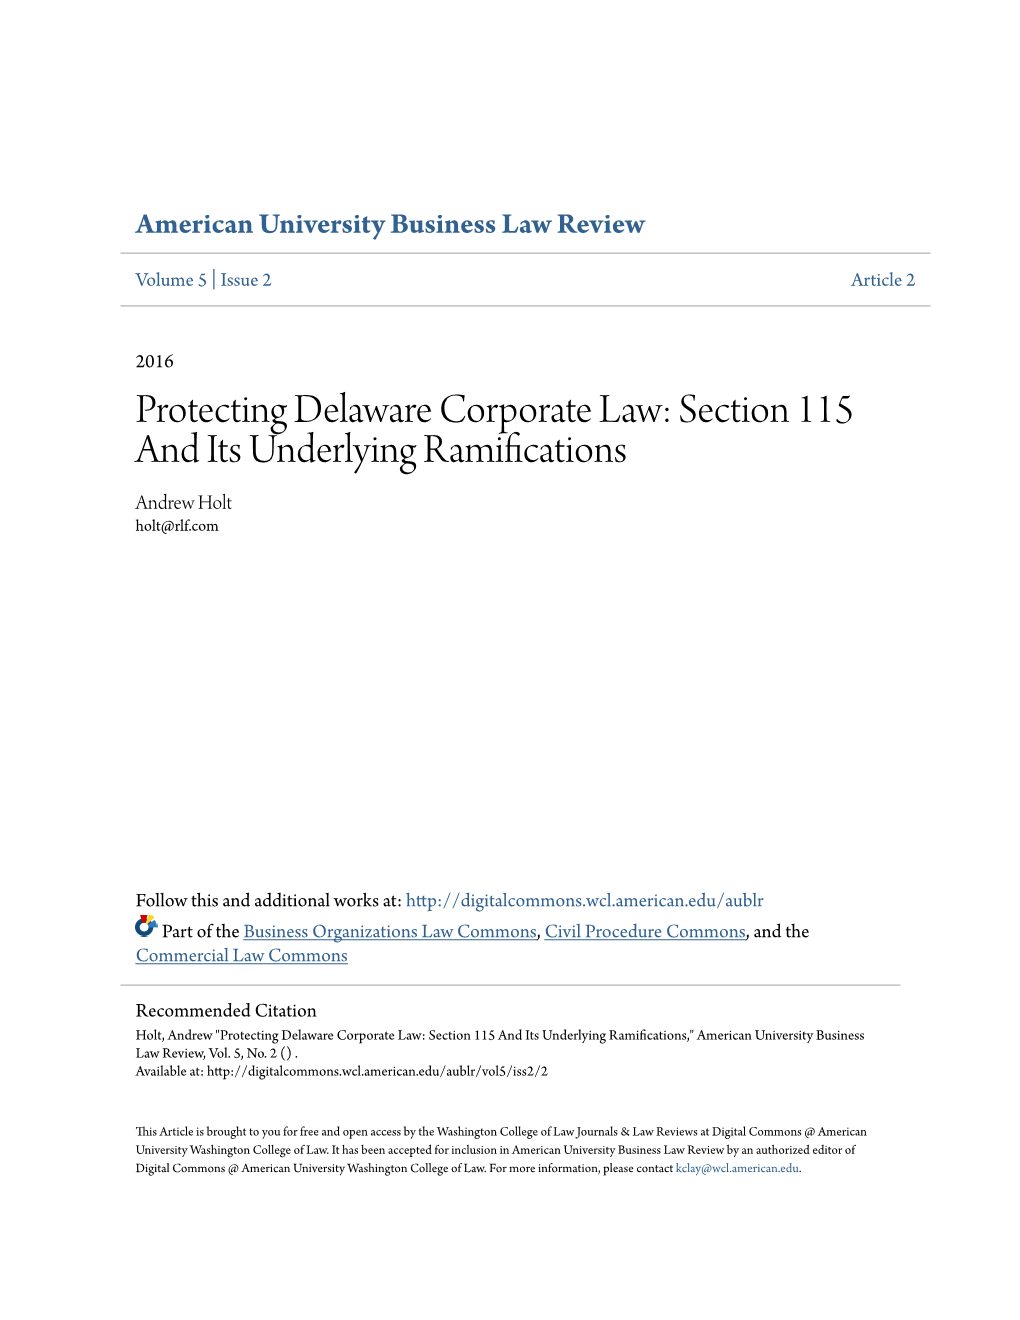 Protecting Delaware Corporate Law: Section 115 and Its Underlying Ramifications Andrew Holt Holt@Rlf.Com